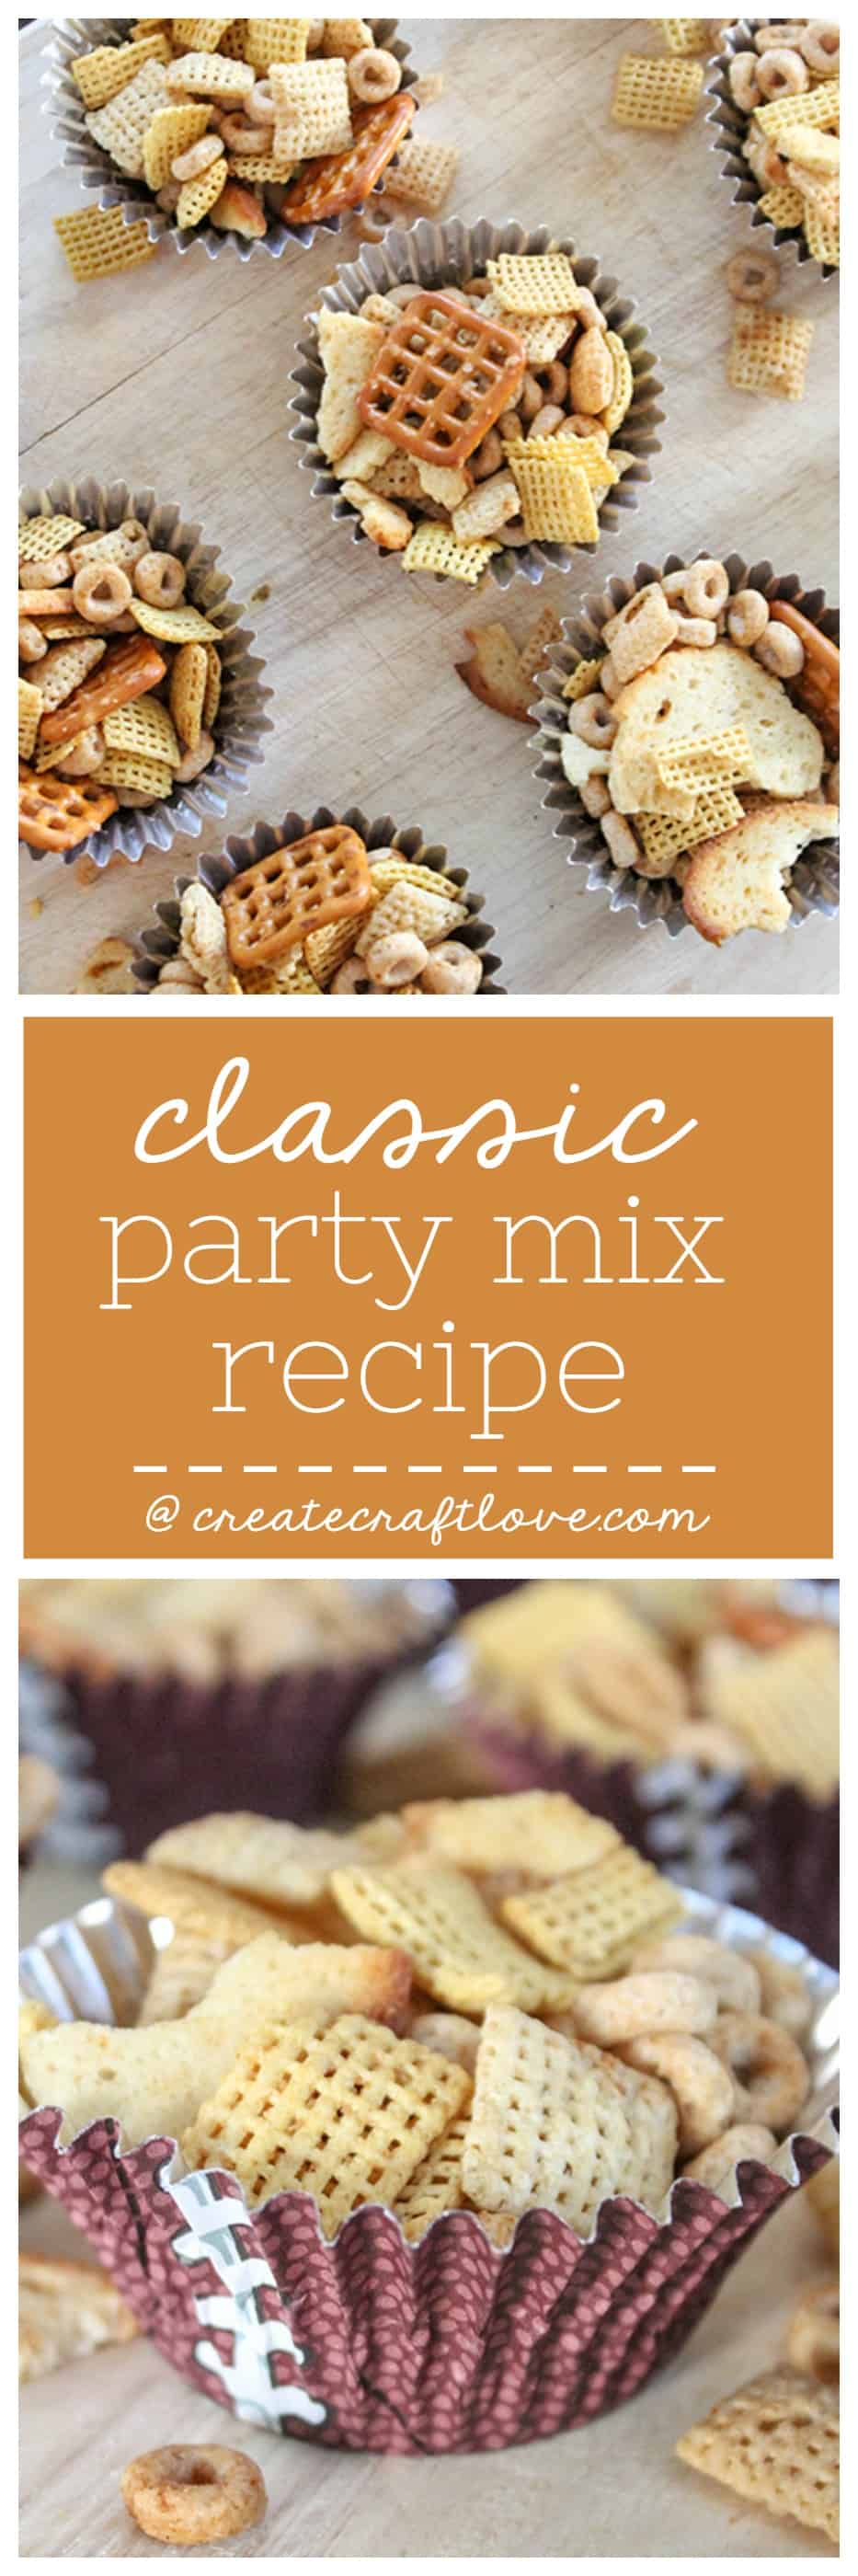 This Classic Party Mix Recipe will flood your taste buds with memories of your childhood! via createcraftlove.com